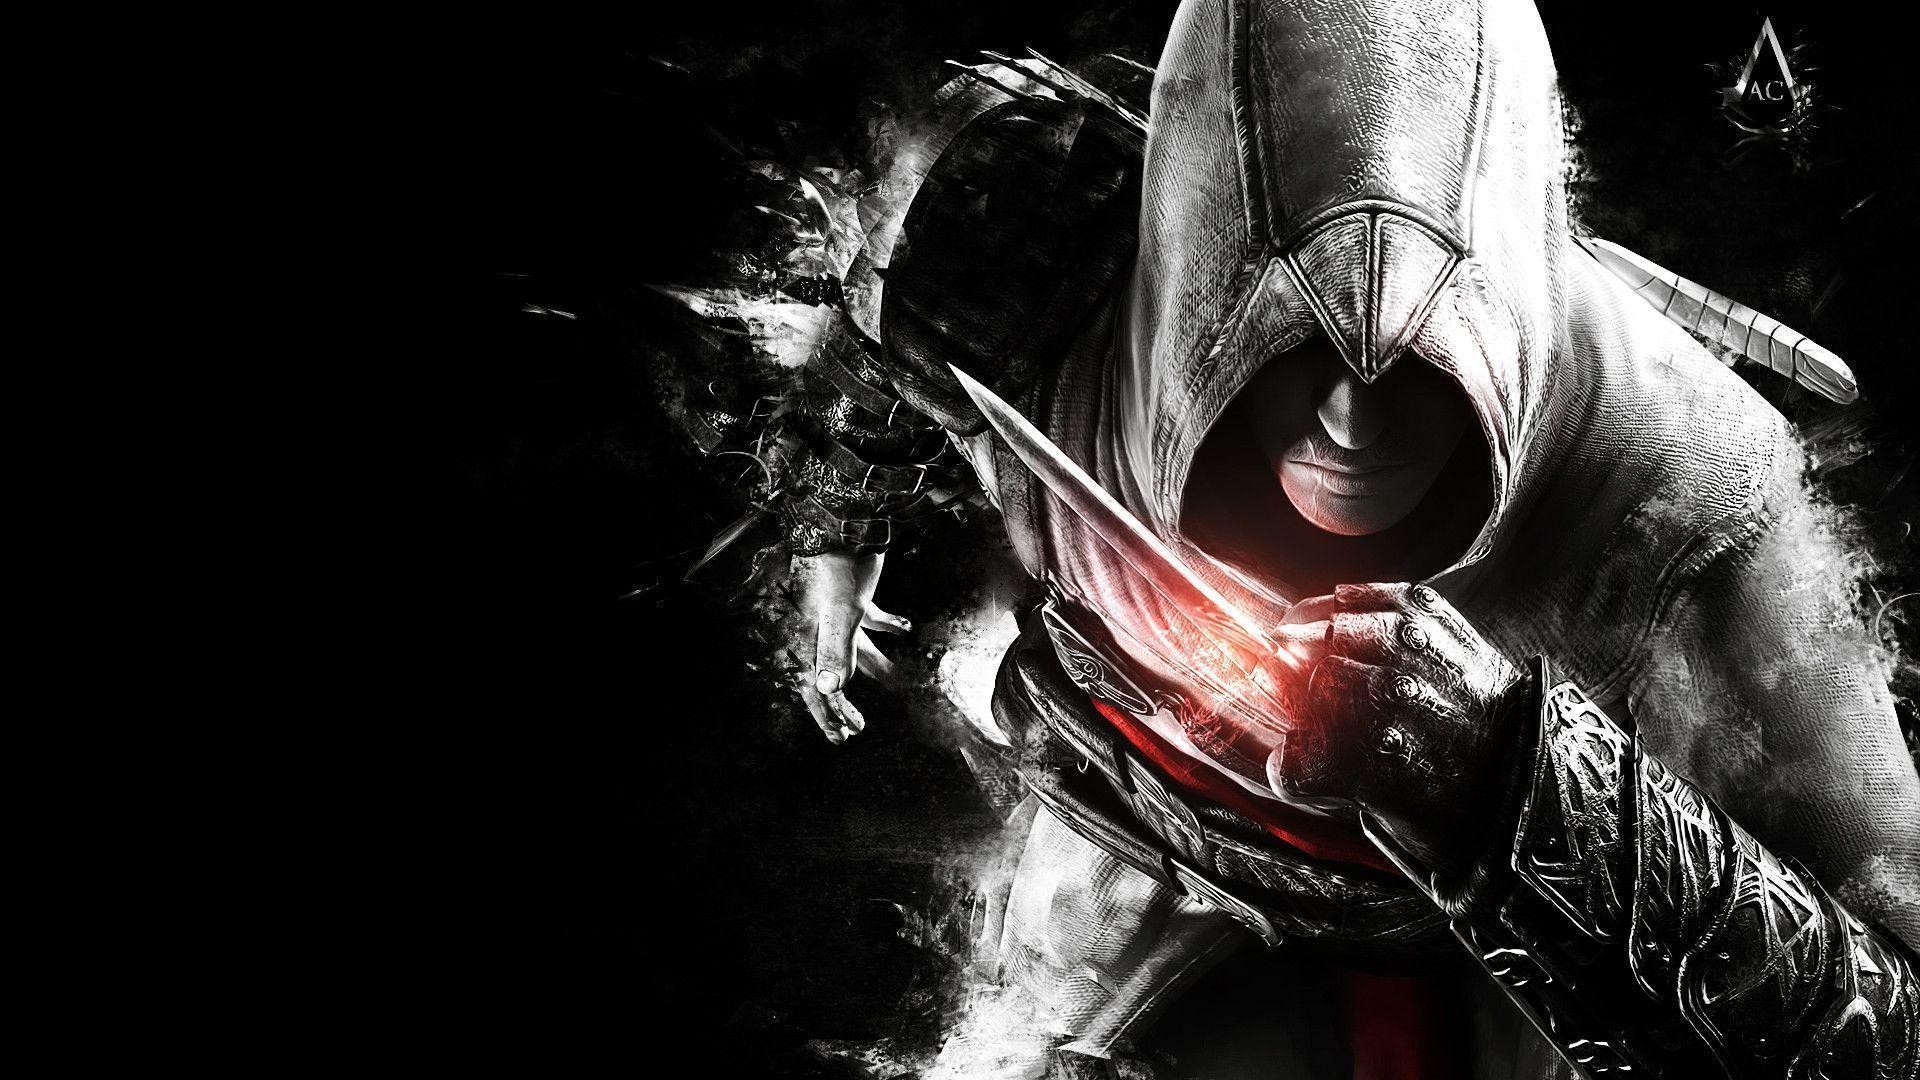 1920x1080 assassins creed hd cool wallpapers | Wallput.